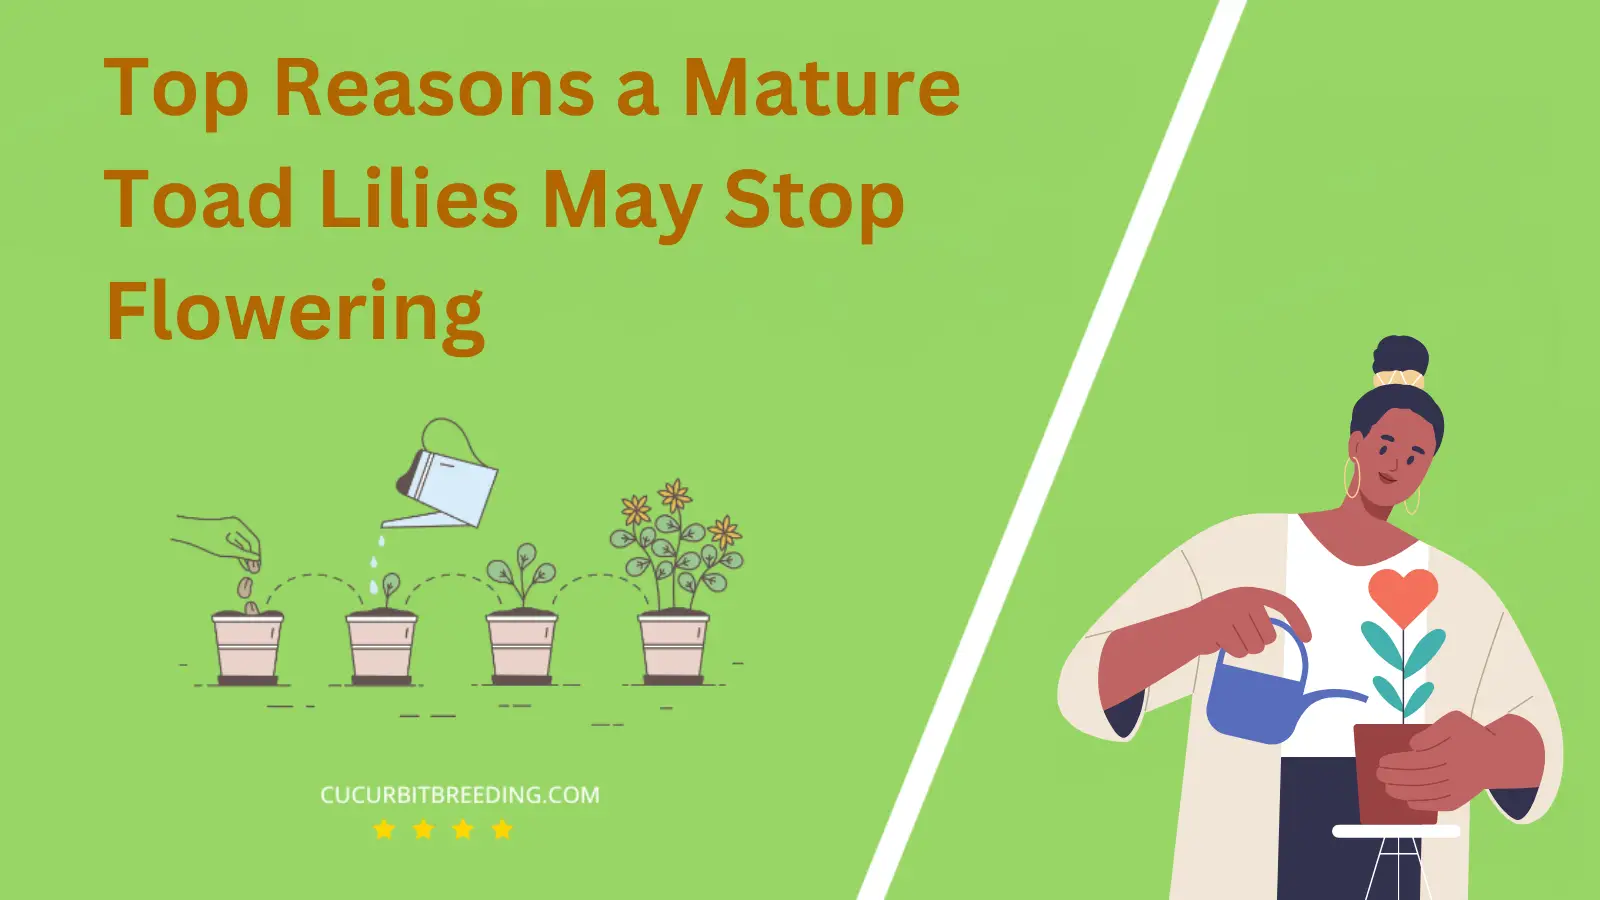 Top Reasons a Mature Toad Lilies May Stop Flowering